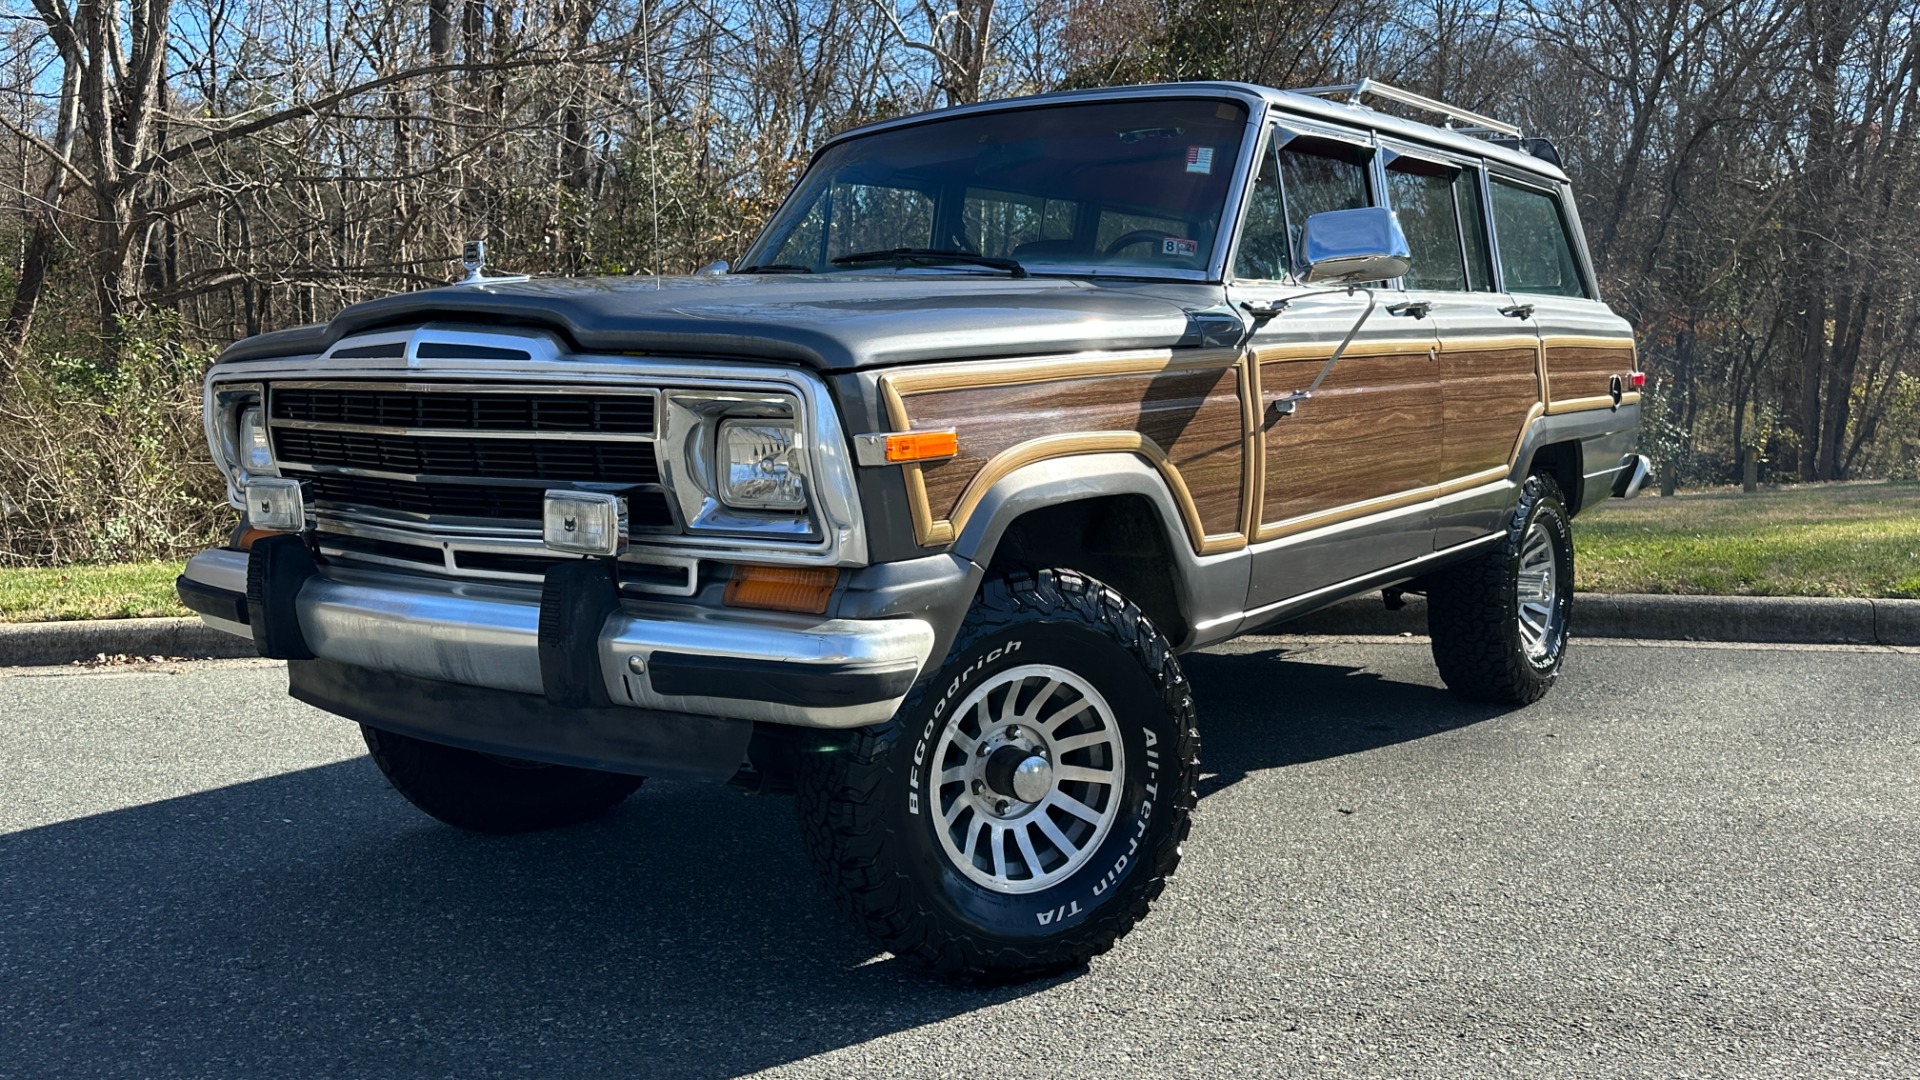 Used 1988 Jeep Grand Wagoneer 5.9L V8 ENGINE / LEATHER AND CLOTH / WOOD SIDING / 4WD for sale $21,995 at Formula Imports in Charlotte NC 28227 1